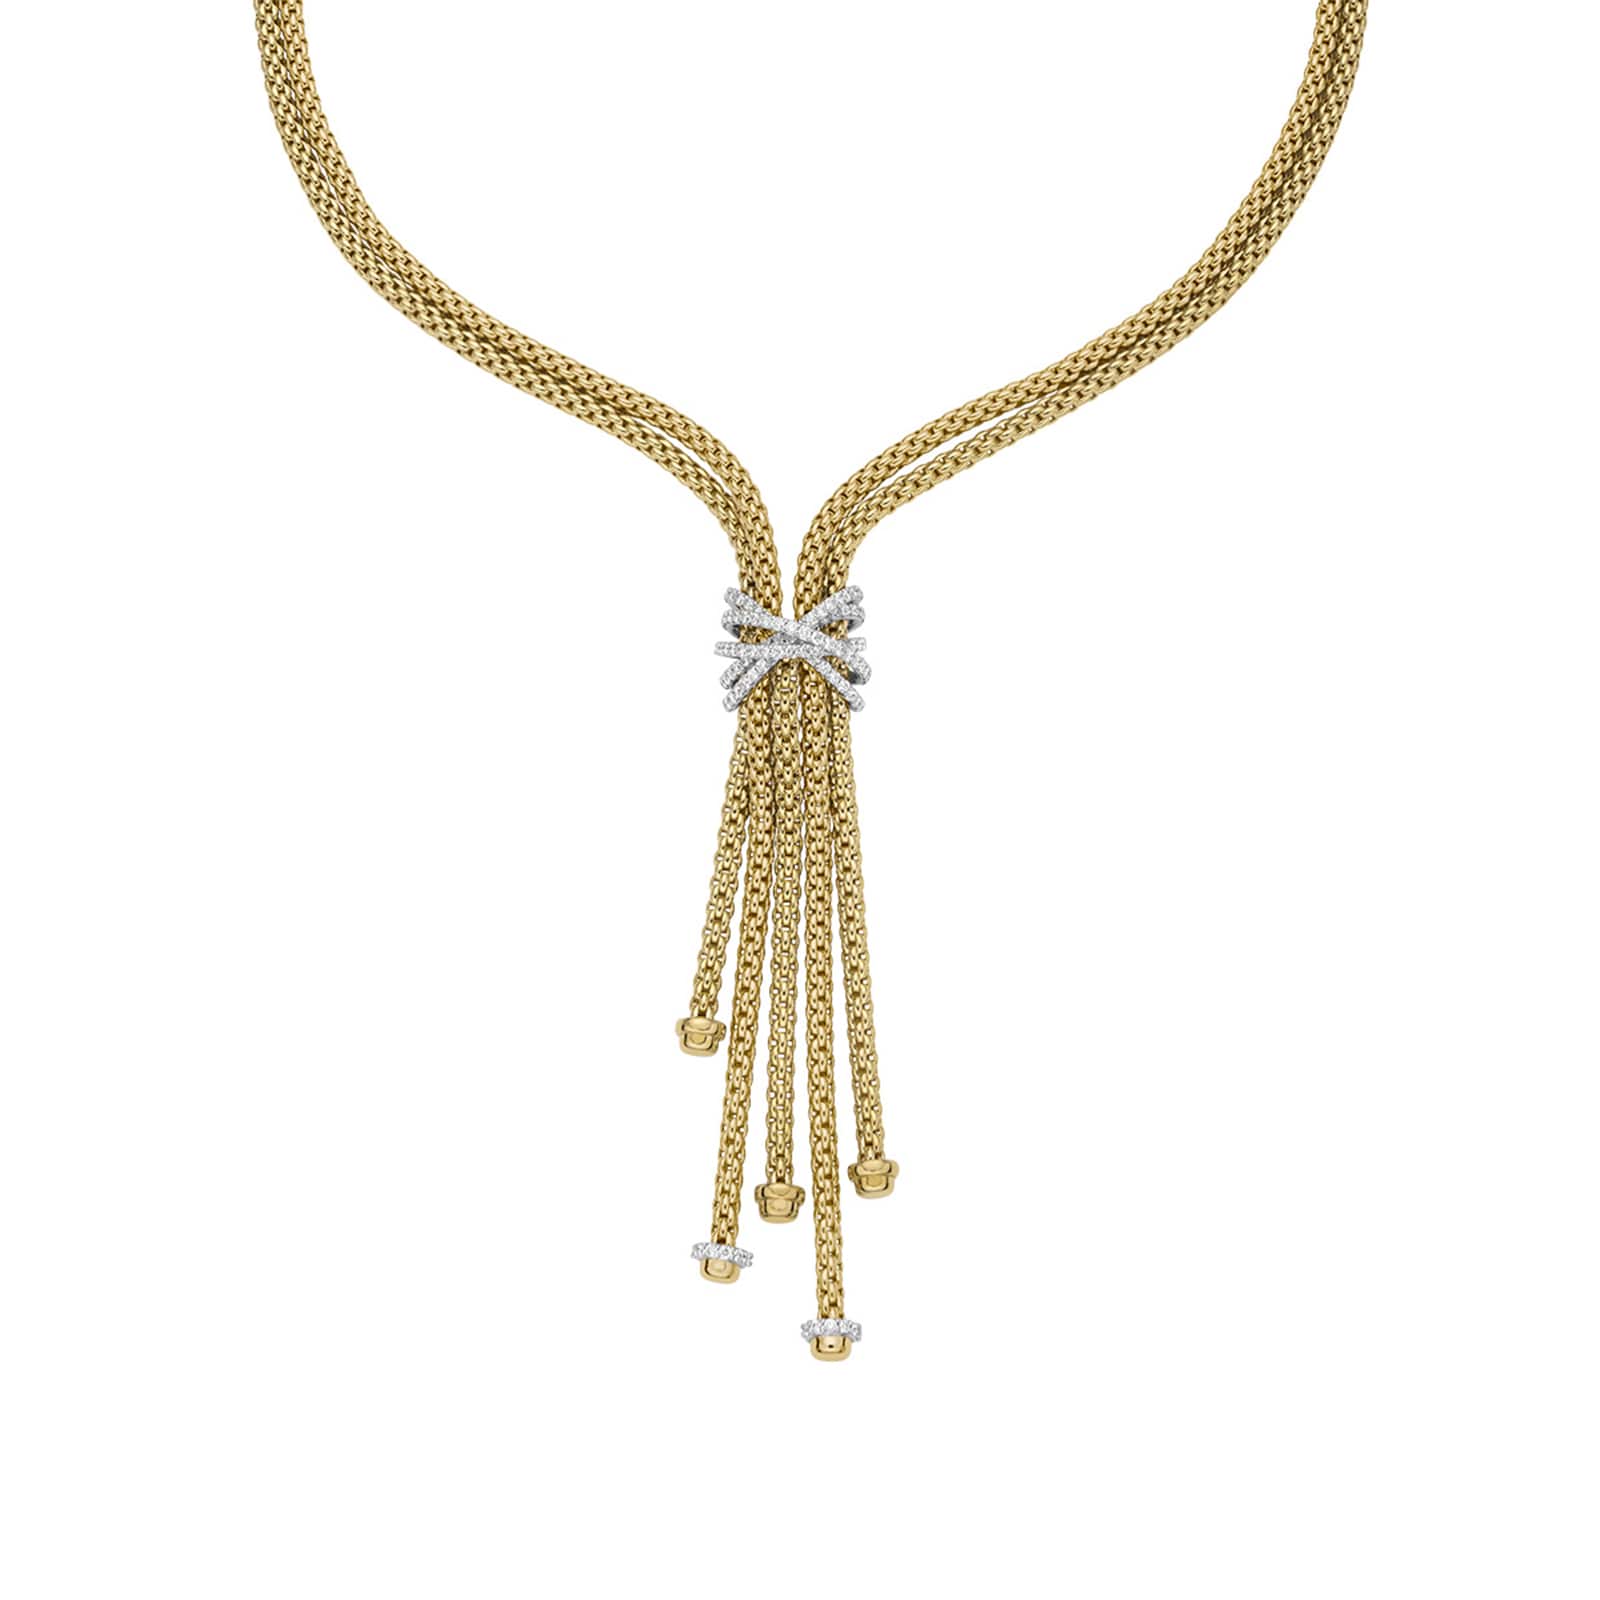 FOPE Fope Gioielli Prima Collection 18ct Yellow Gold Mesh Necklace